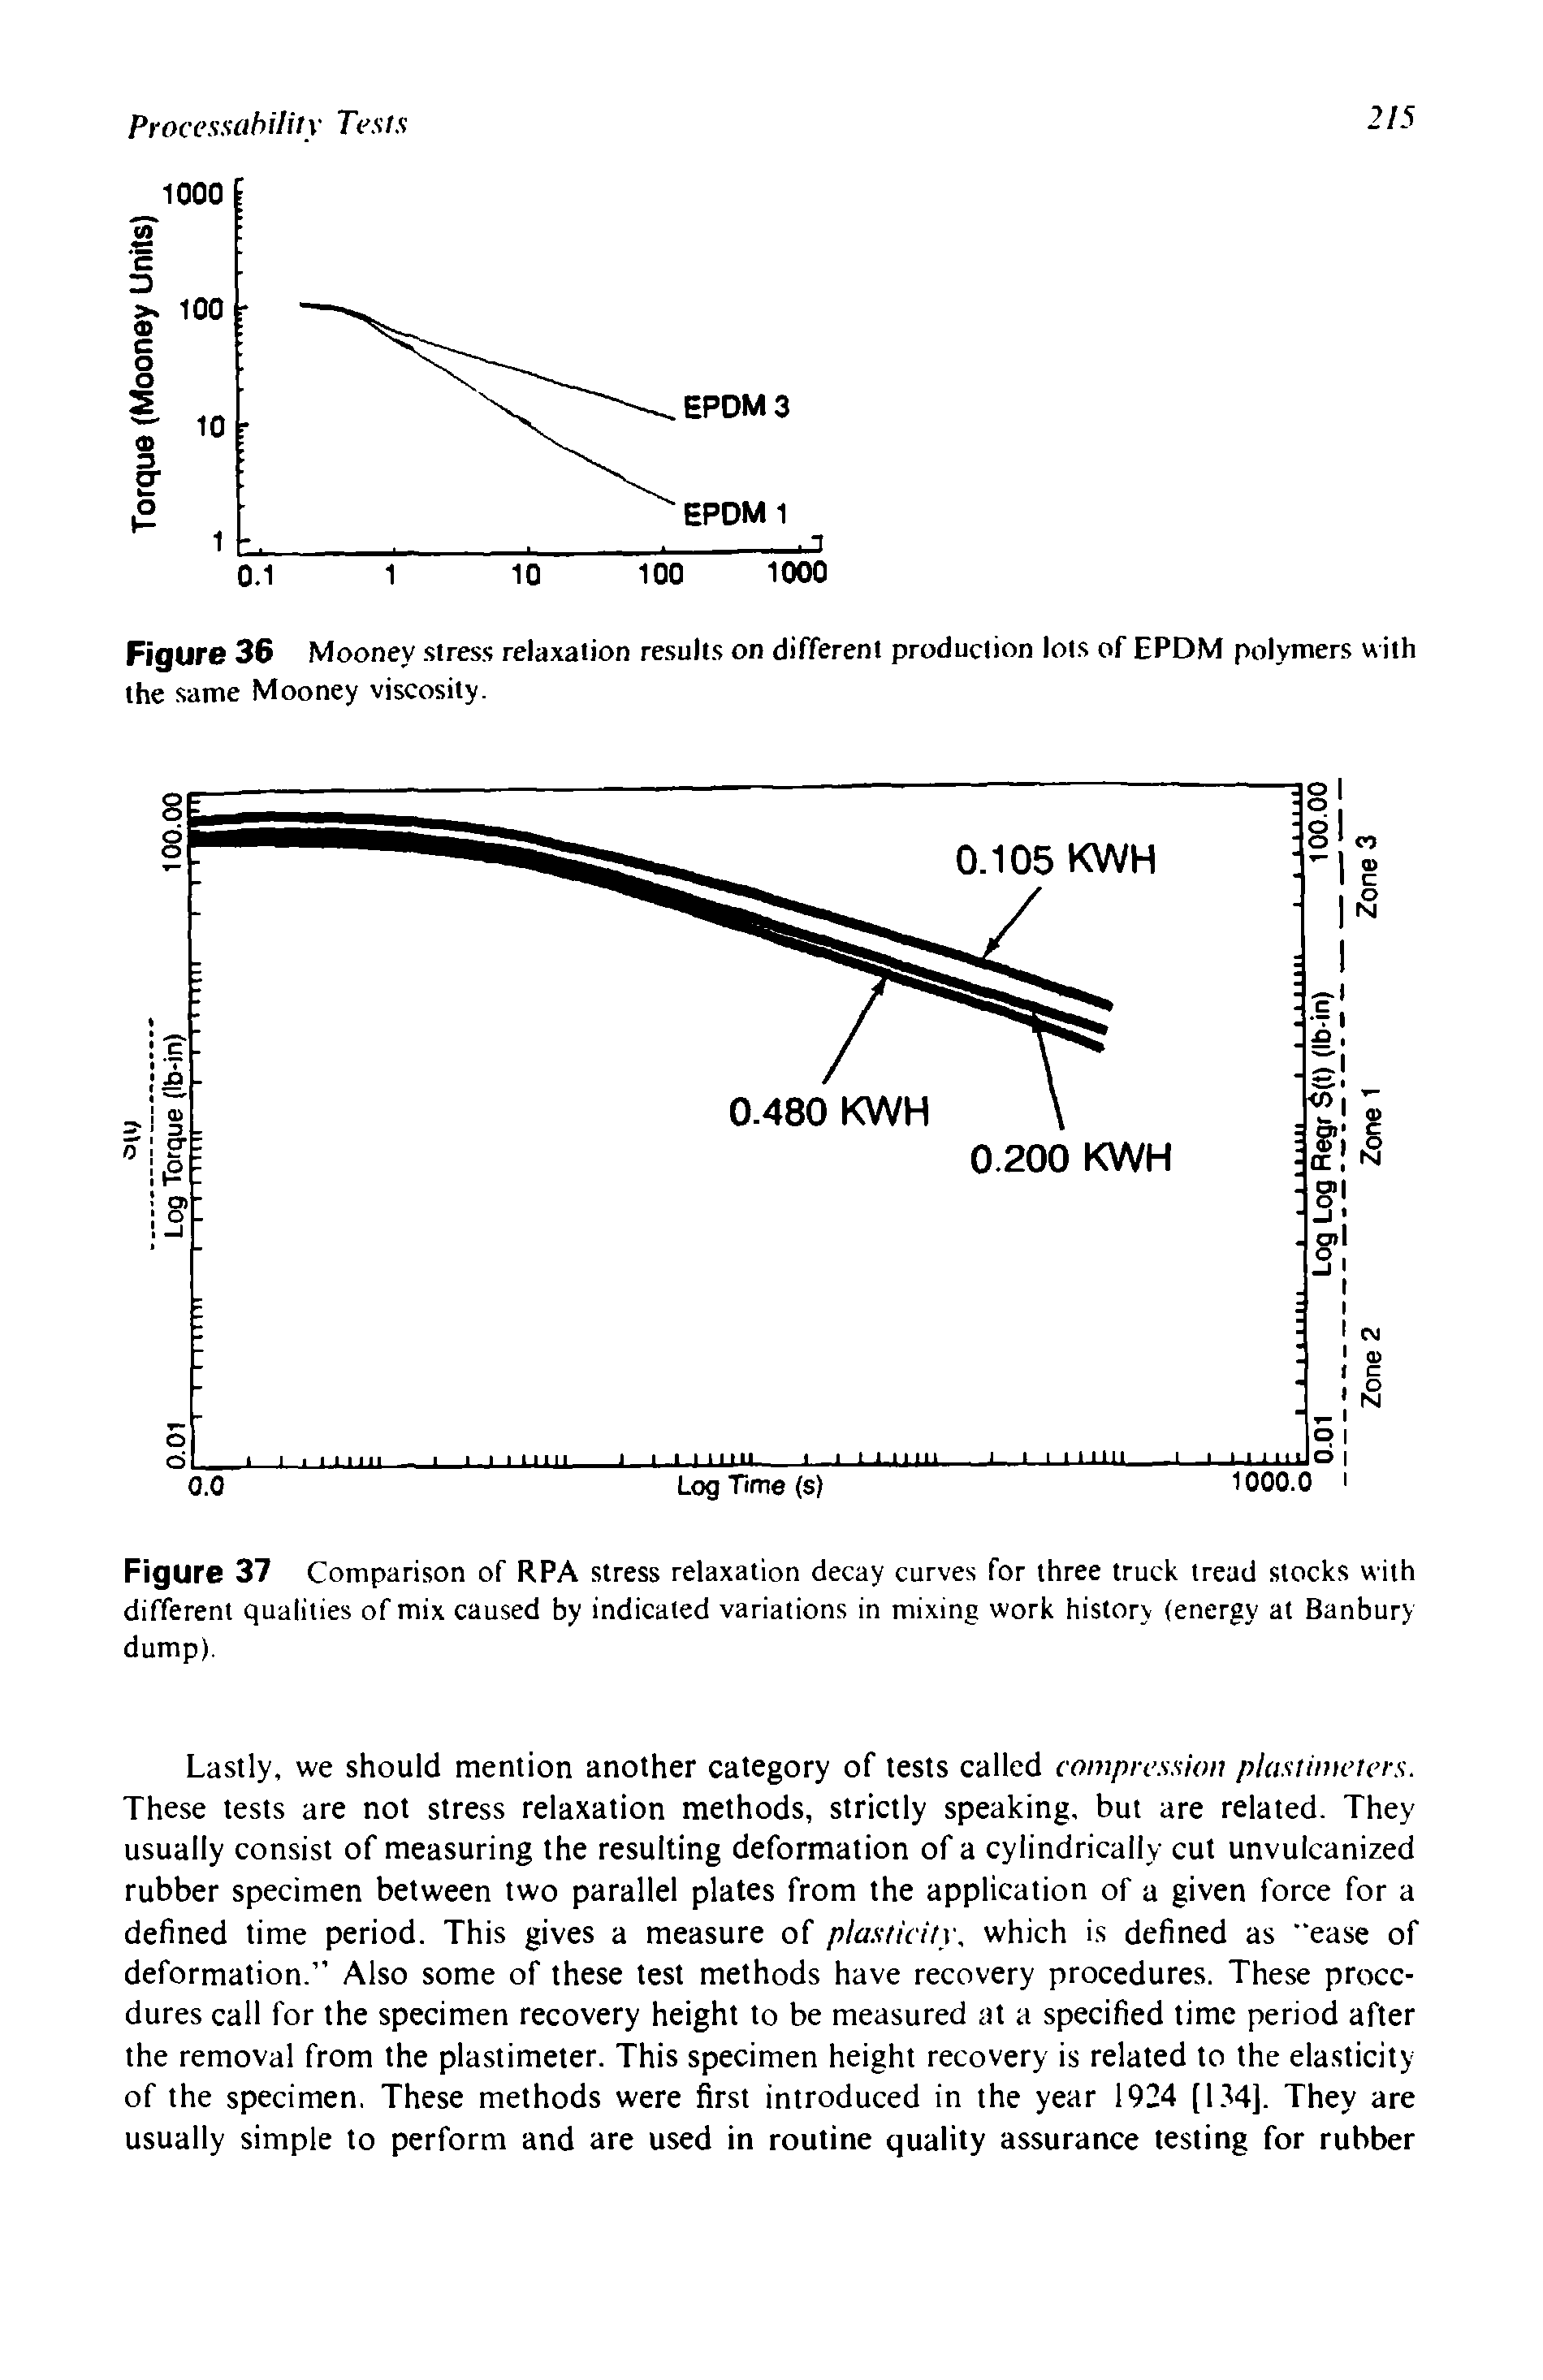 Figure 37 Comparison of RPA stress relaxation decay curves for three truck tread stocks with different qualities of mix caused by indicated variations in mixing work history (energy at Banbury dump).